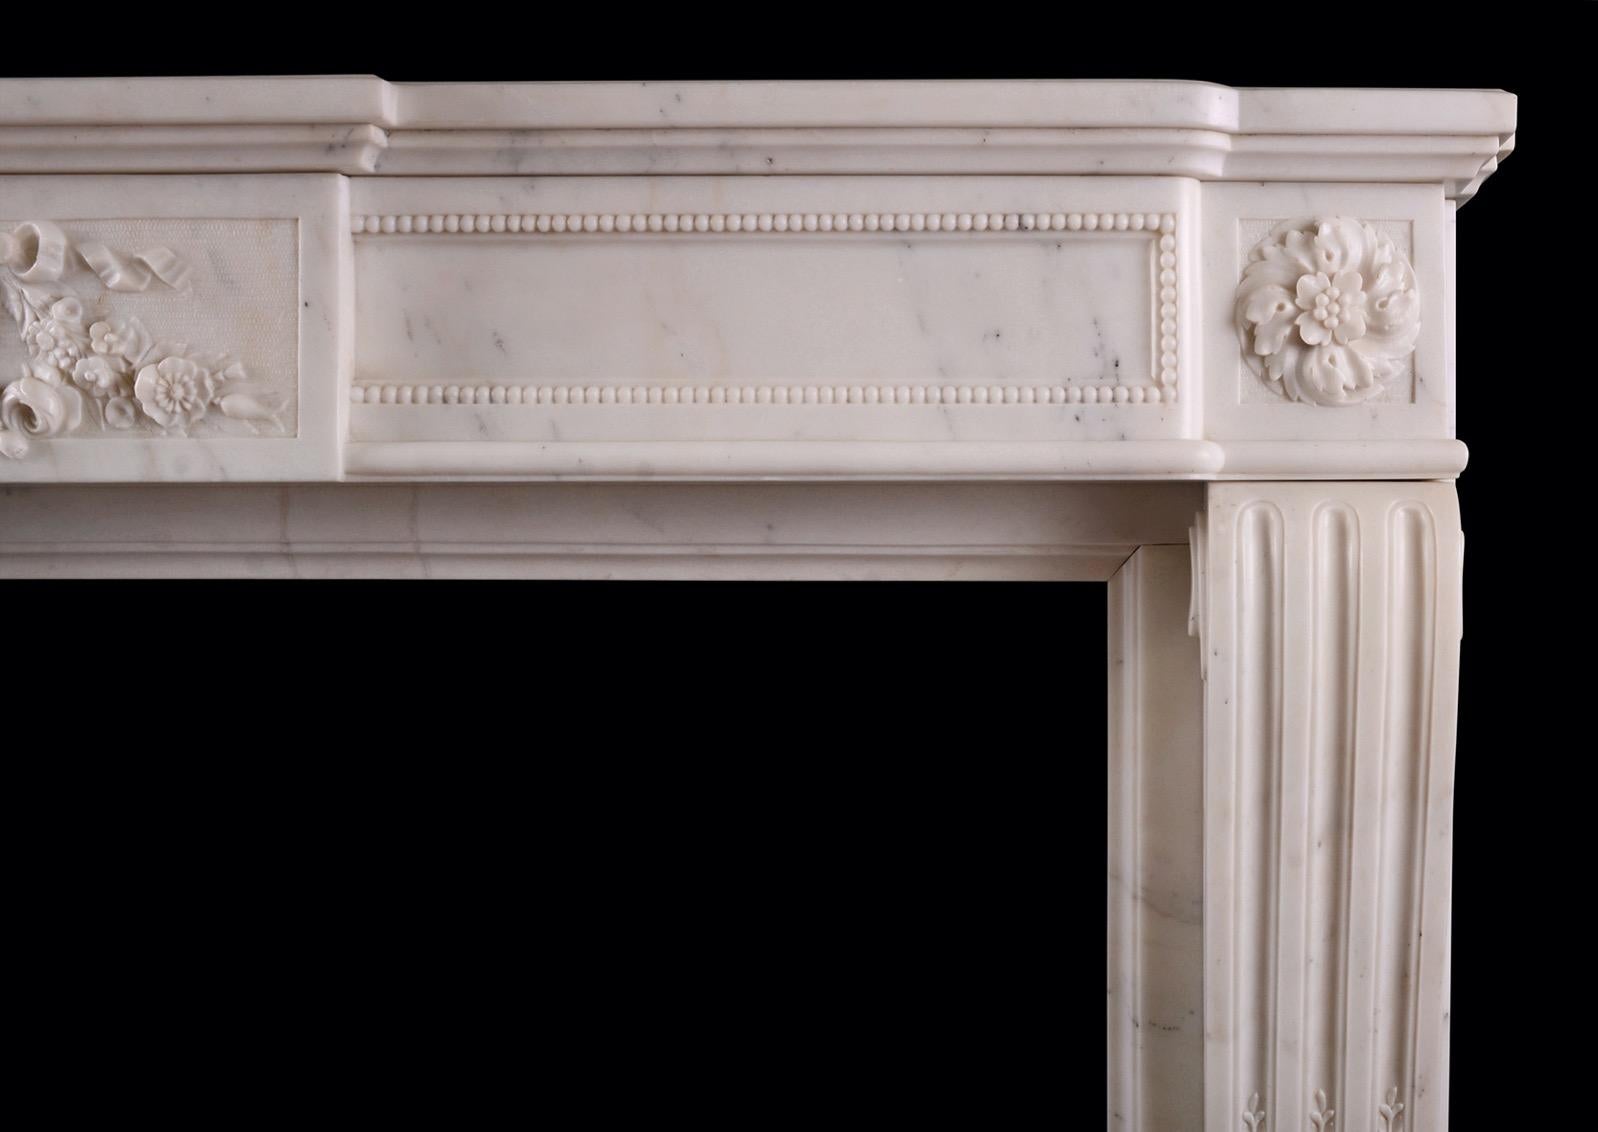 A good quality French Louis XVI style fireplace in Statuary white marble. The shaped jambs with fluting carved with husks, surmounted by rosette paterae. The bowed frieze with fine carved beading and central panel with flowers and ribbons. Moulded